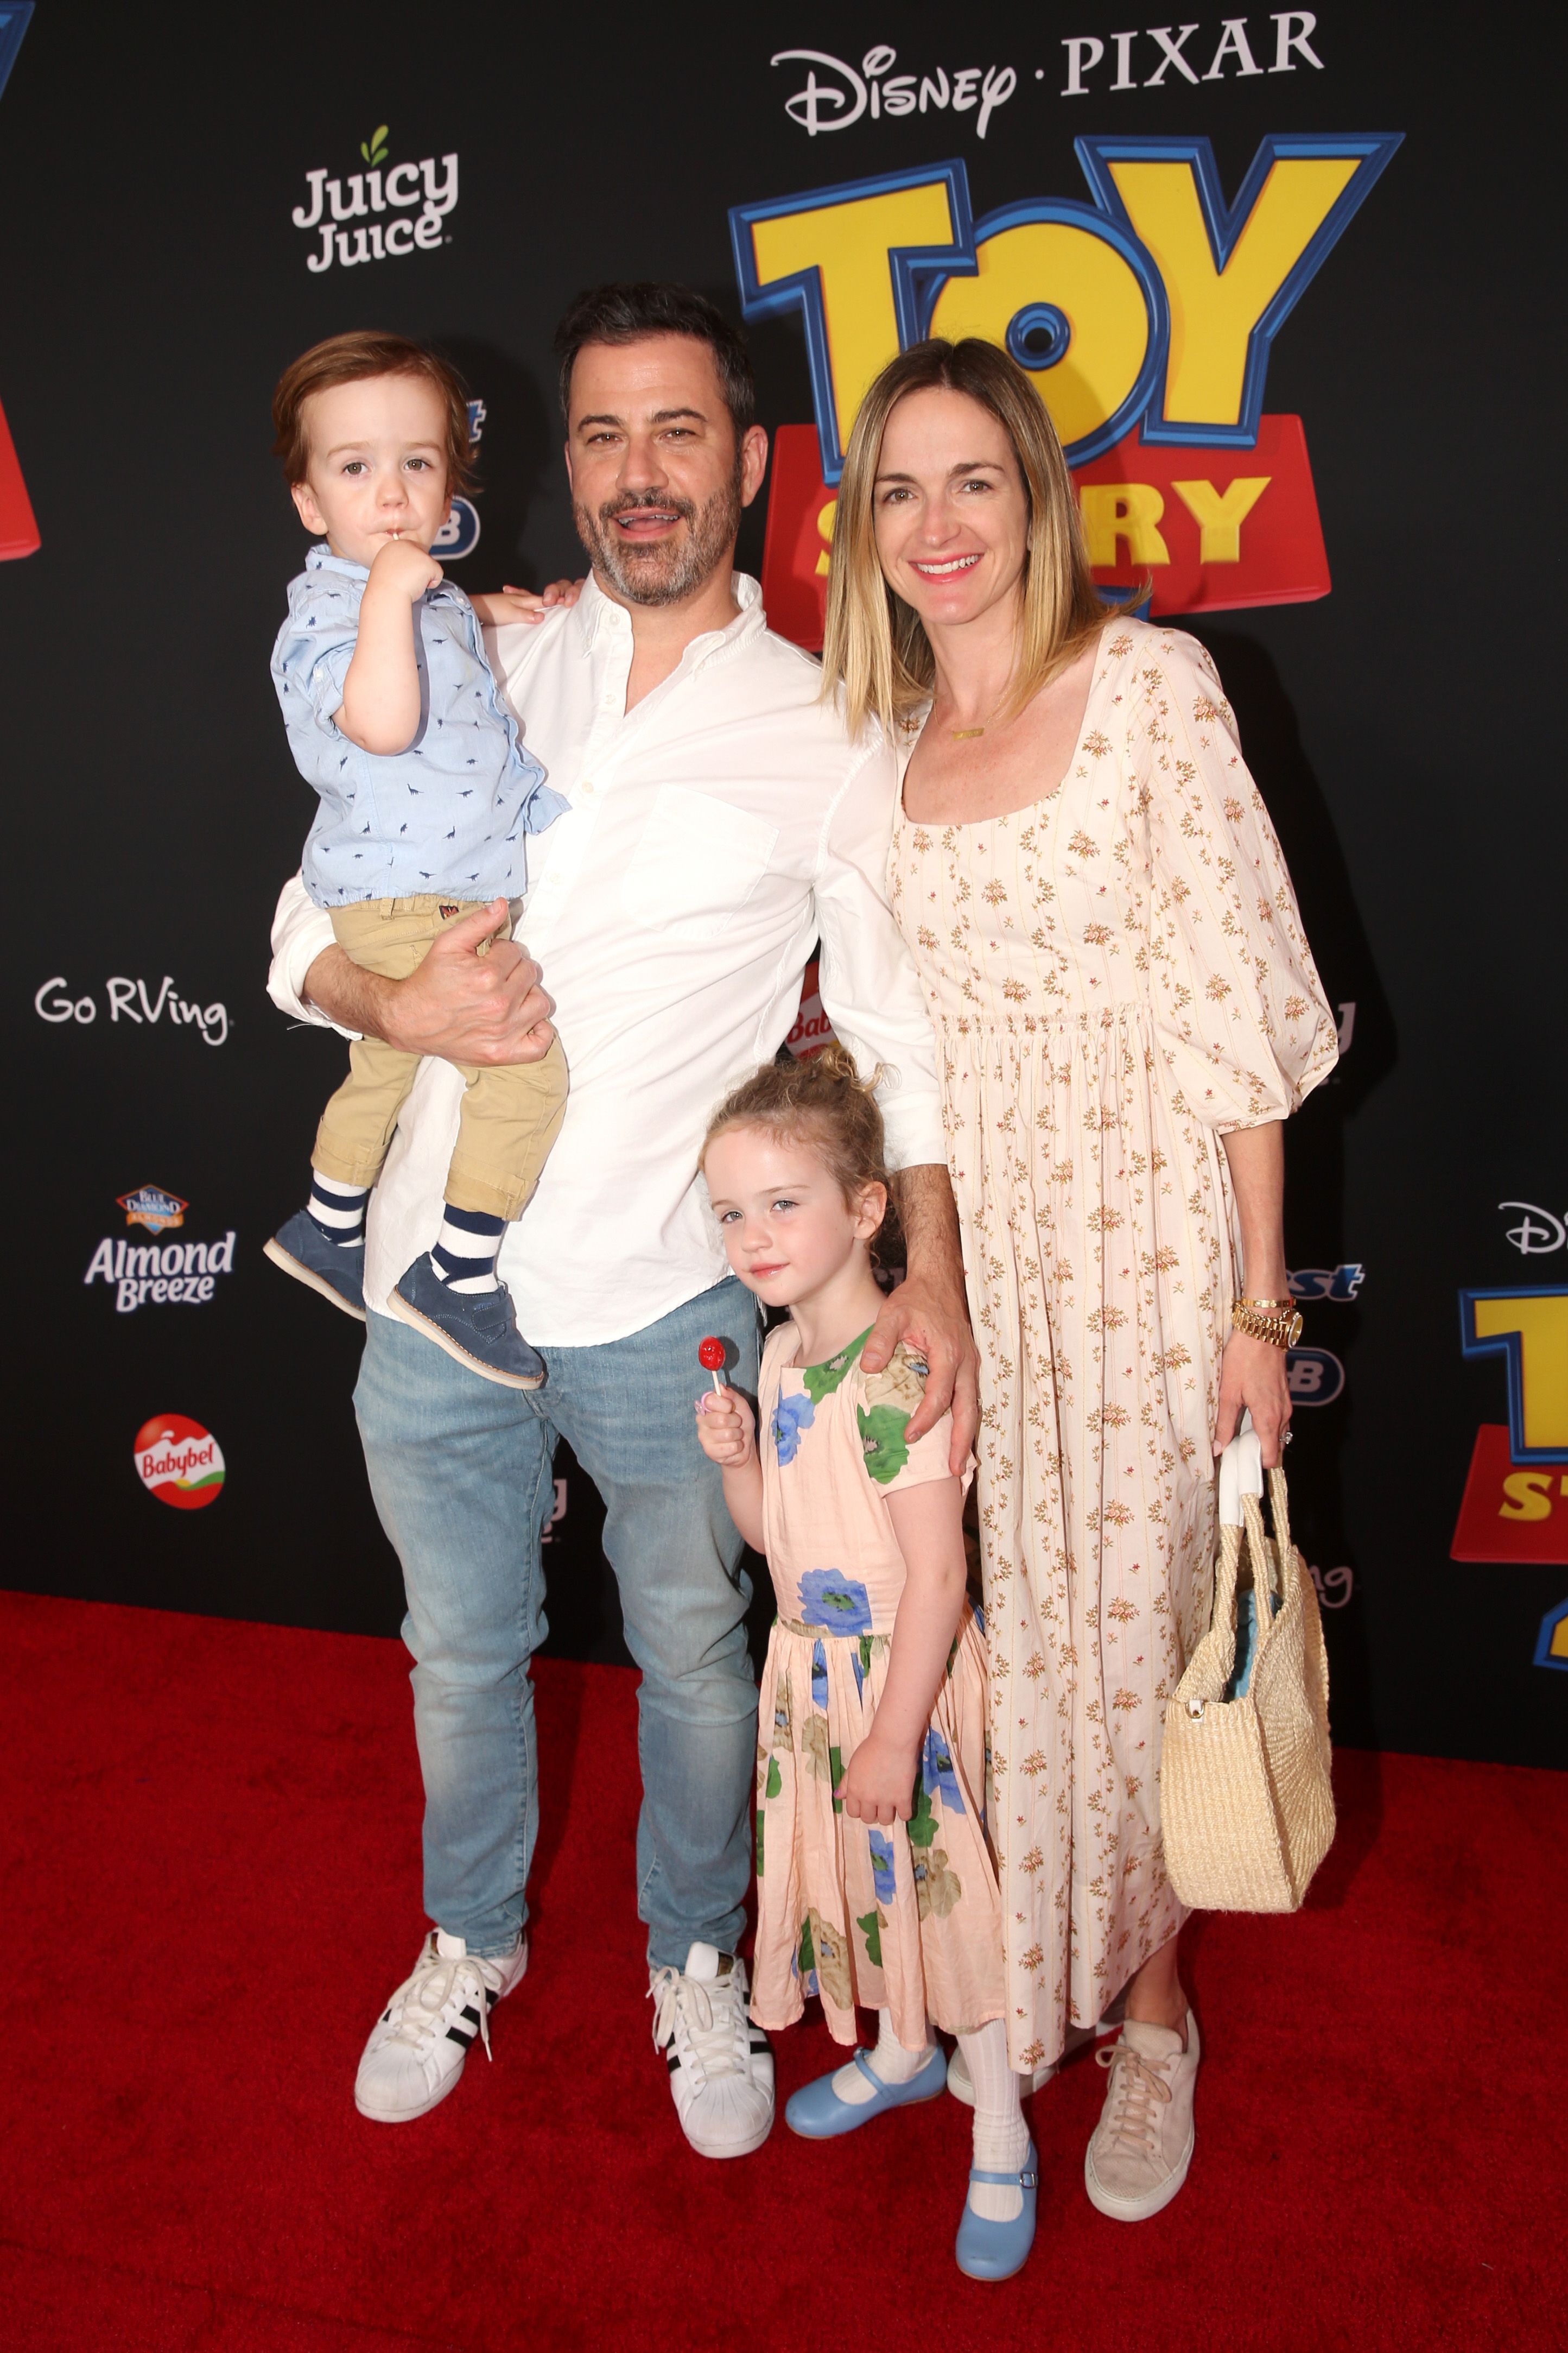 William Kimmel, Jimmy Kimmel, Jane Kimmel, and Molly McNearney during the world premiere of Disney and Pixar's TOY STORY 4 at the El Capitan Theatre in Hollywood, CA on Tuesday, June 11, 2019. | Source: Getty Images